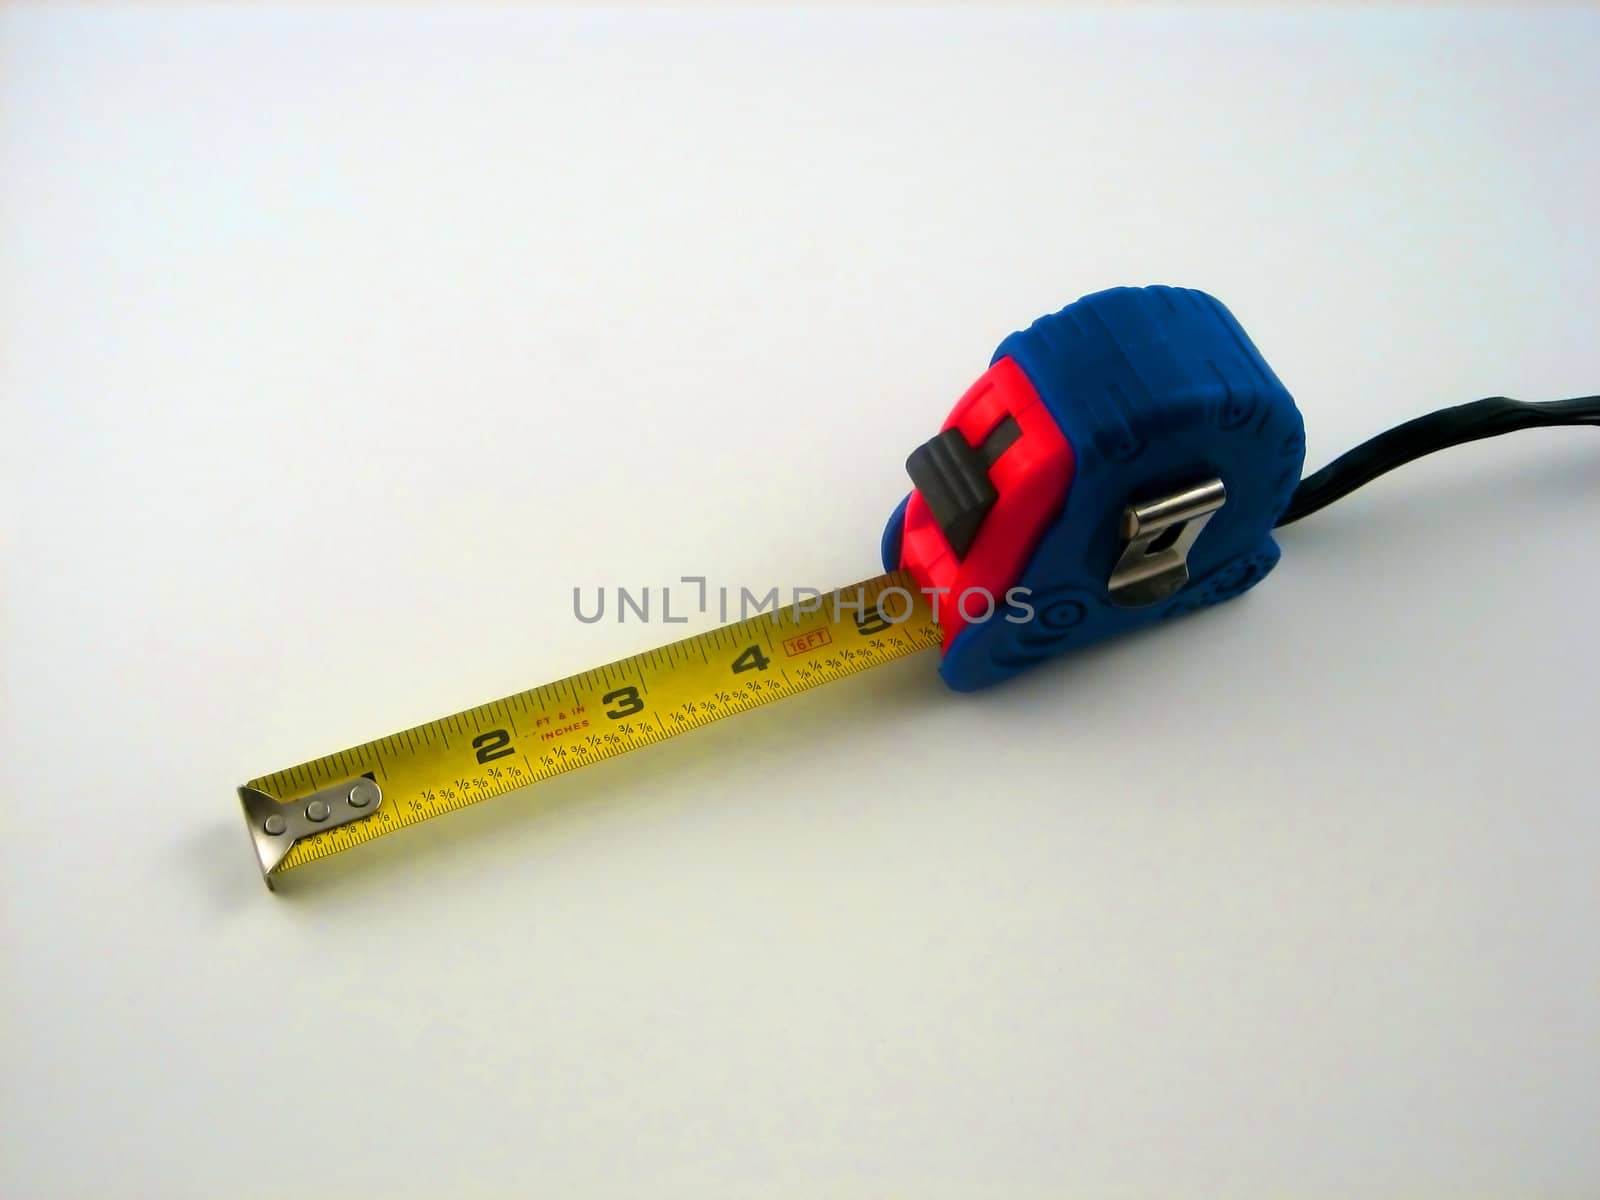 pictures of a ruler and measuring tape